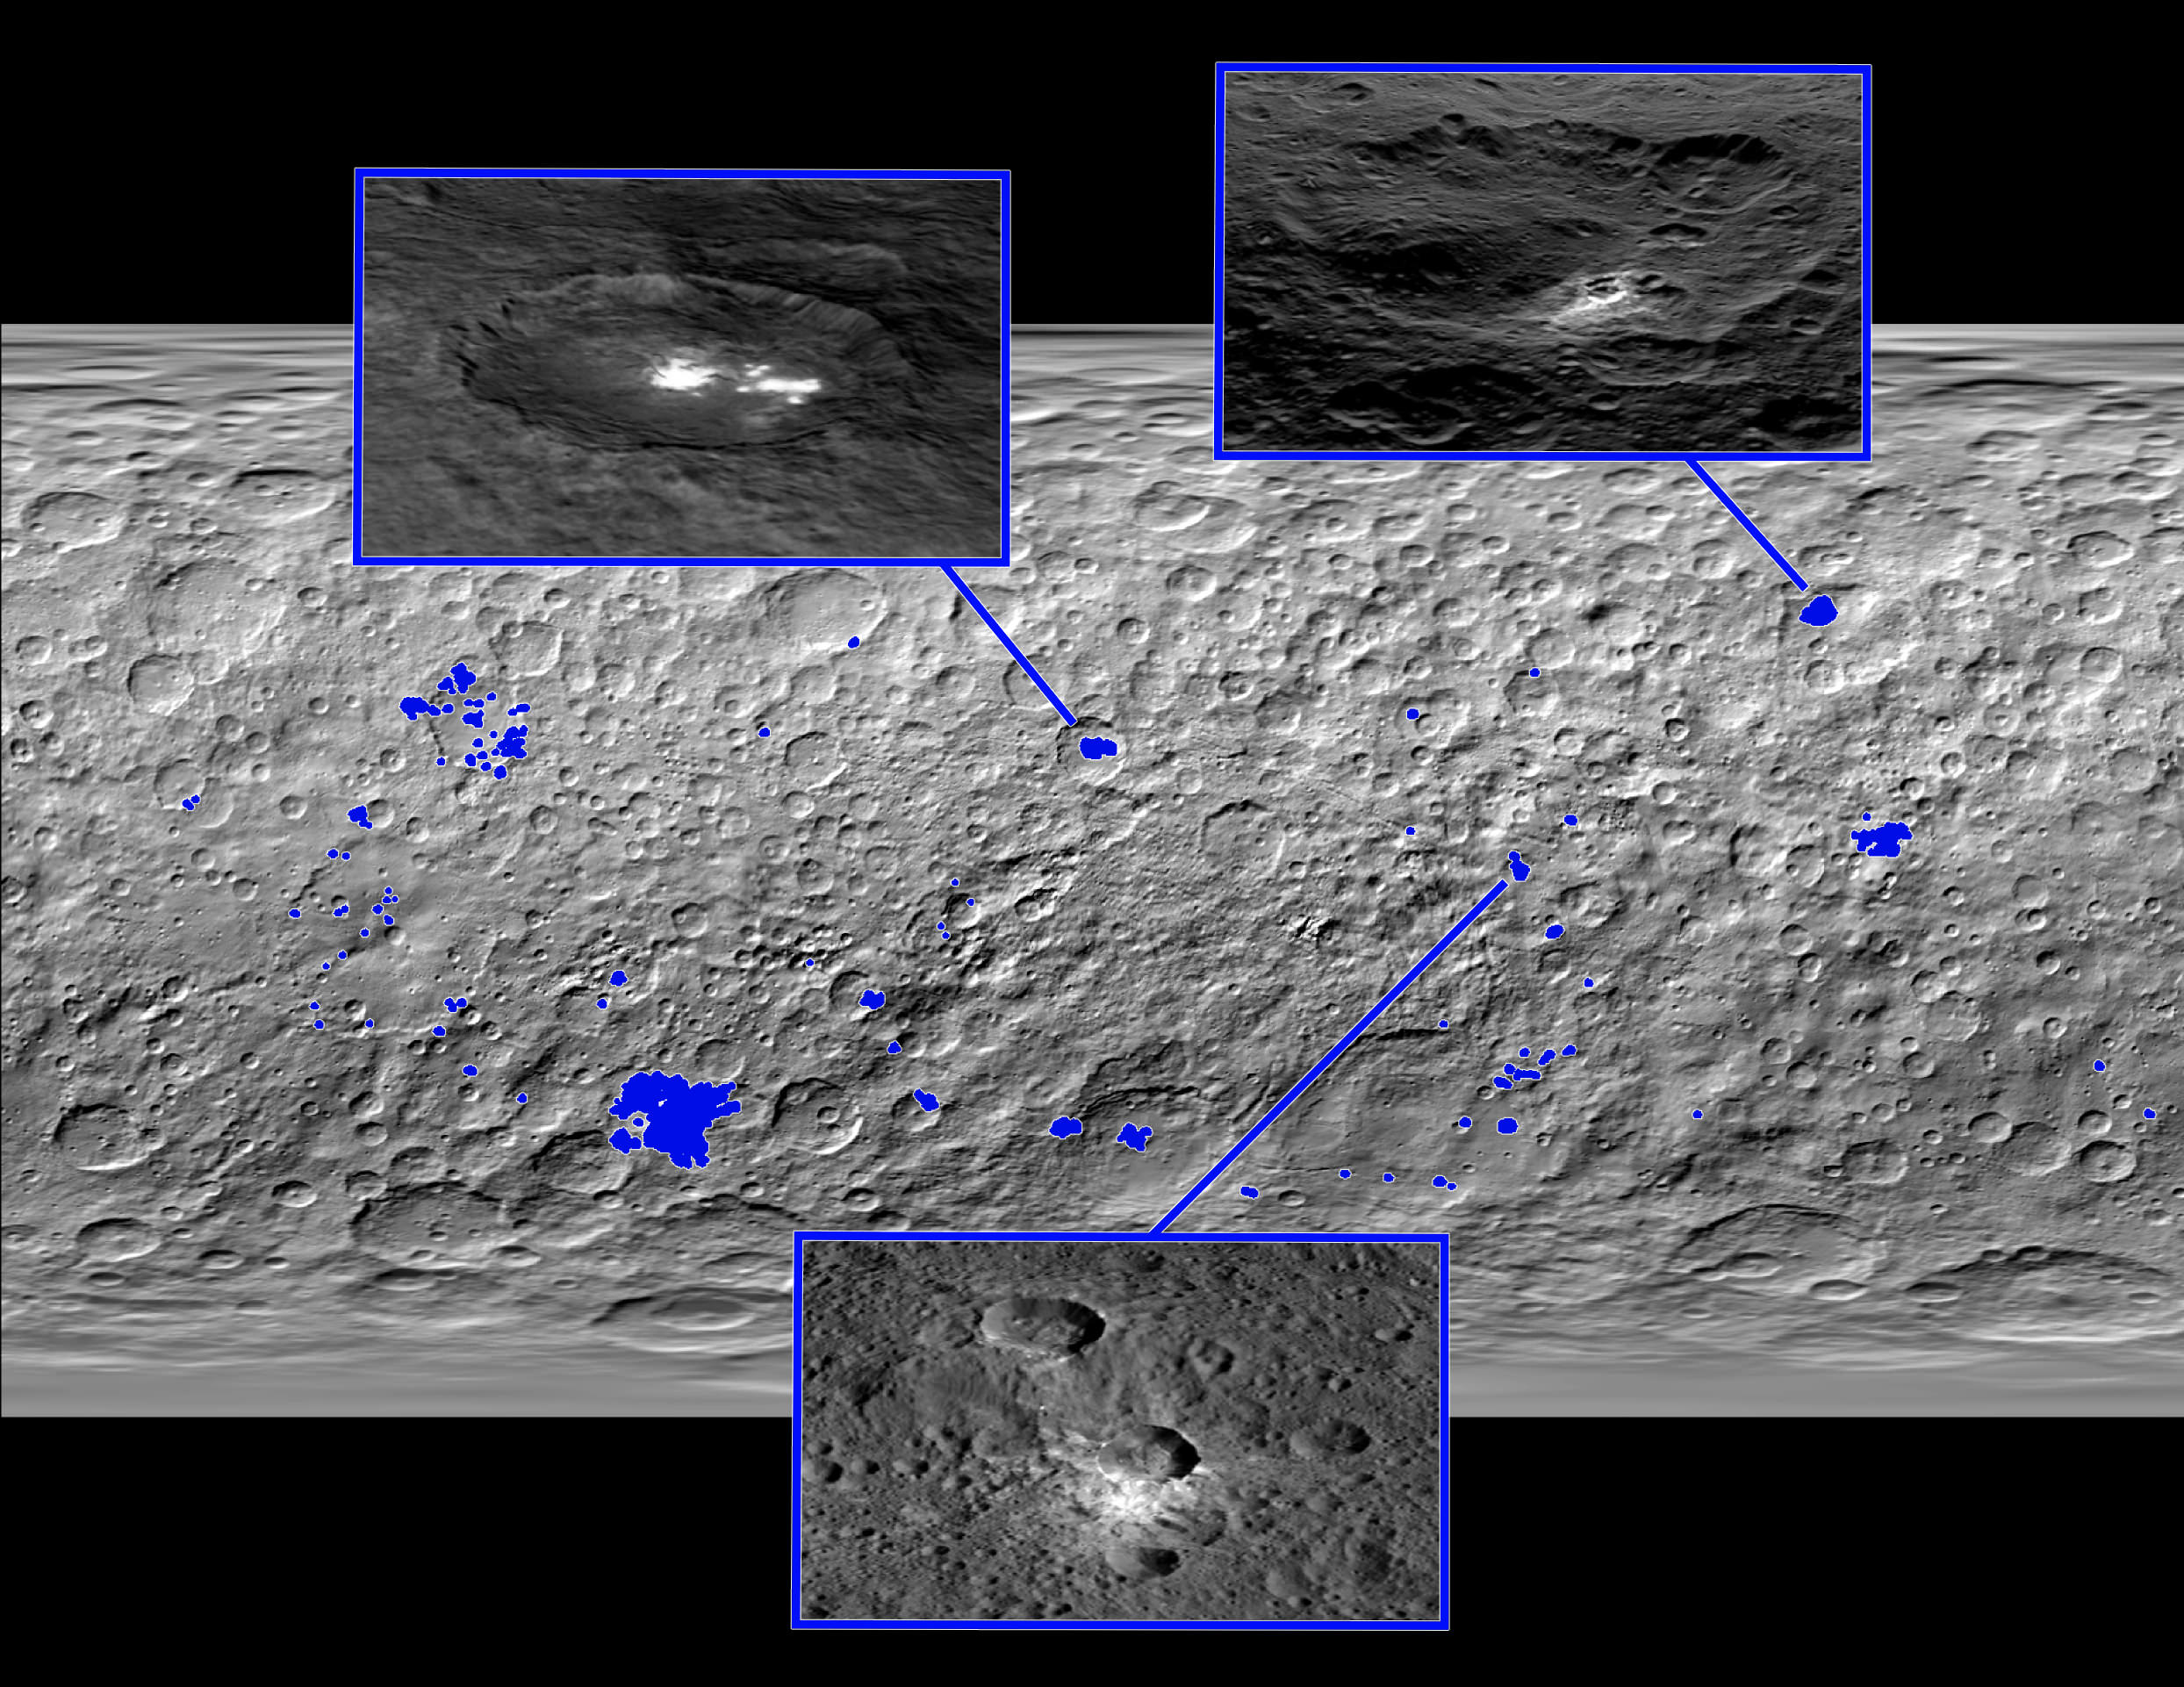 Bright Spot Locations on Ceres.  This map of Ceres, made from images taken by NASA's Dawn spacecraft, shows the locations of about 130 bright areas across the dwarf planet's surface, highlighted in blue.  Most of these bright areas are associated with craters.  Occator Crater, containing the brightest area on Ceres, is shown at top left; Oxo Crater, the second-brightest feature on Ceres, is at top right. Credits: NASA/JPL-Caltech/UCLA/MPS/DLR/IDA